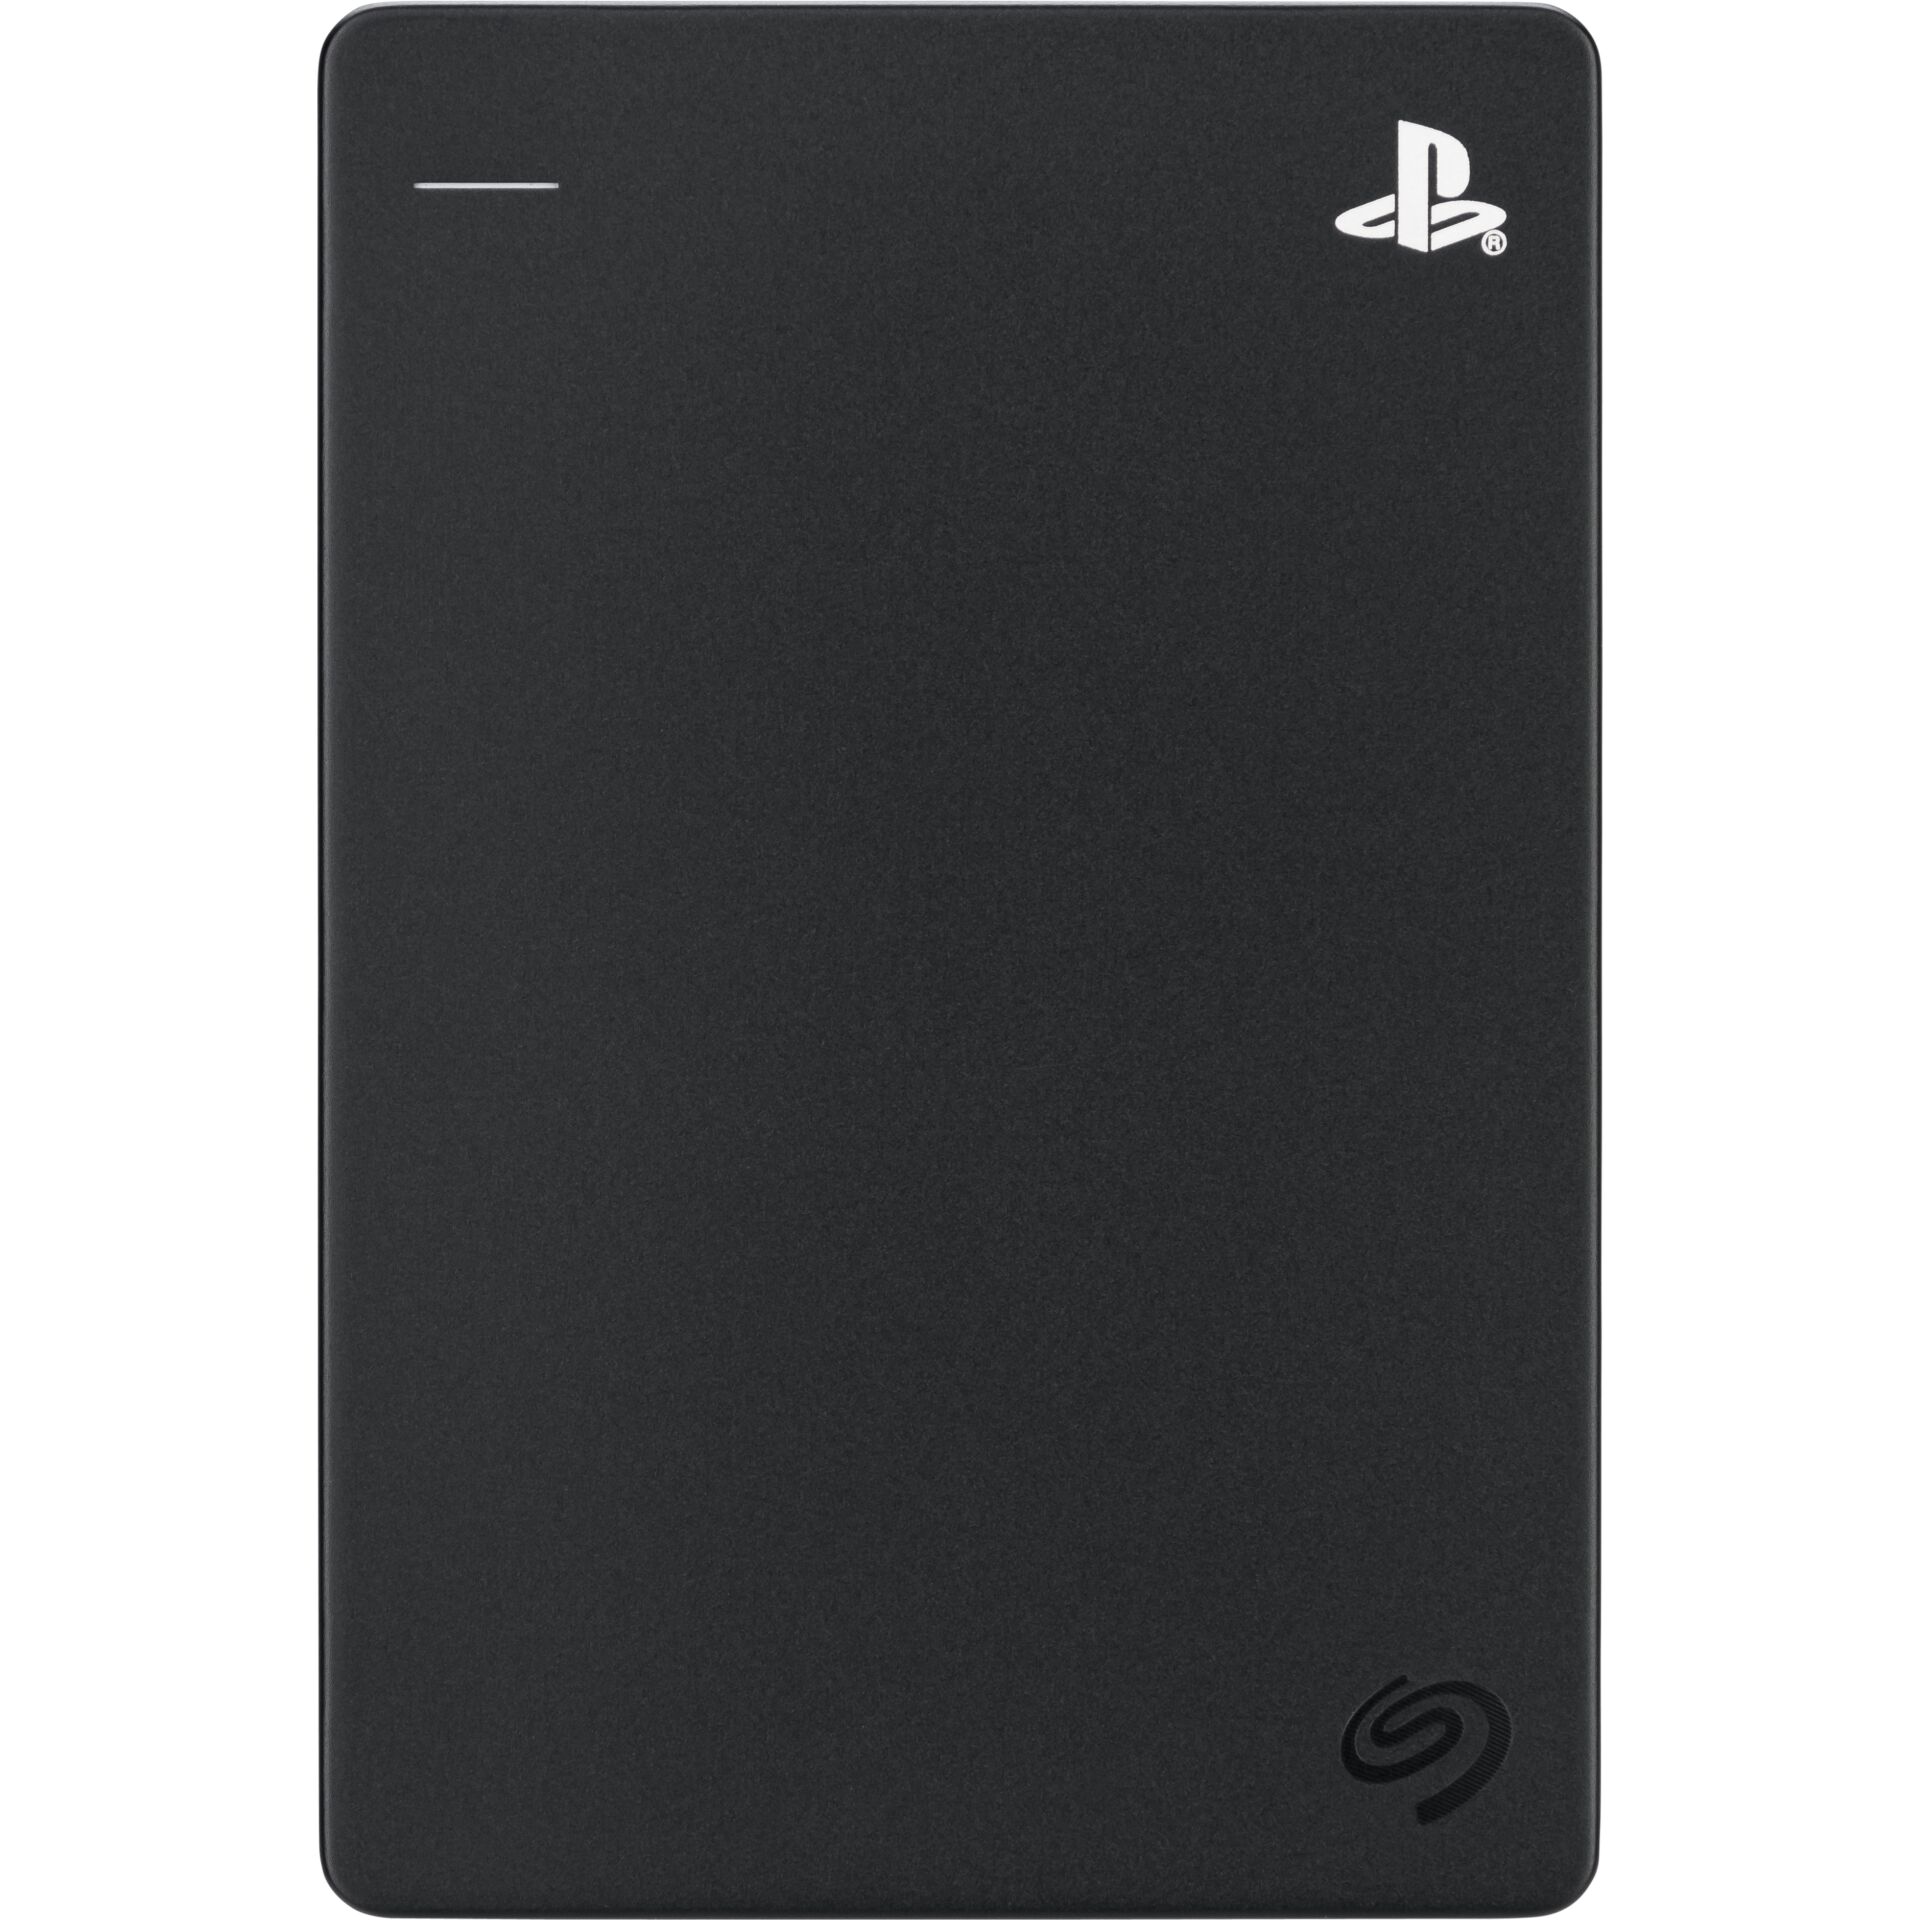 Seagate Game Drive for PlayStation Harddisk STLL4000200 4TB USB 3.0